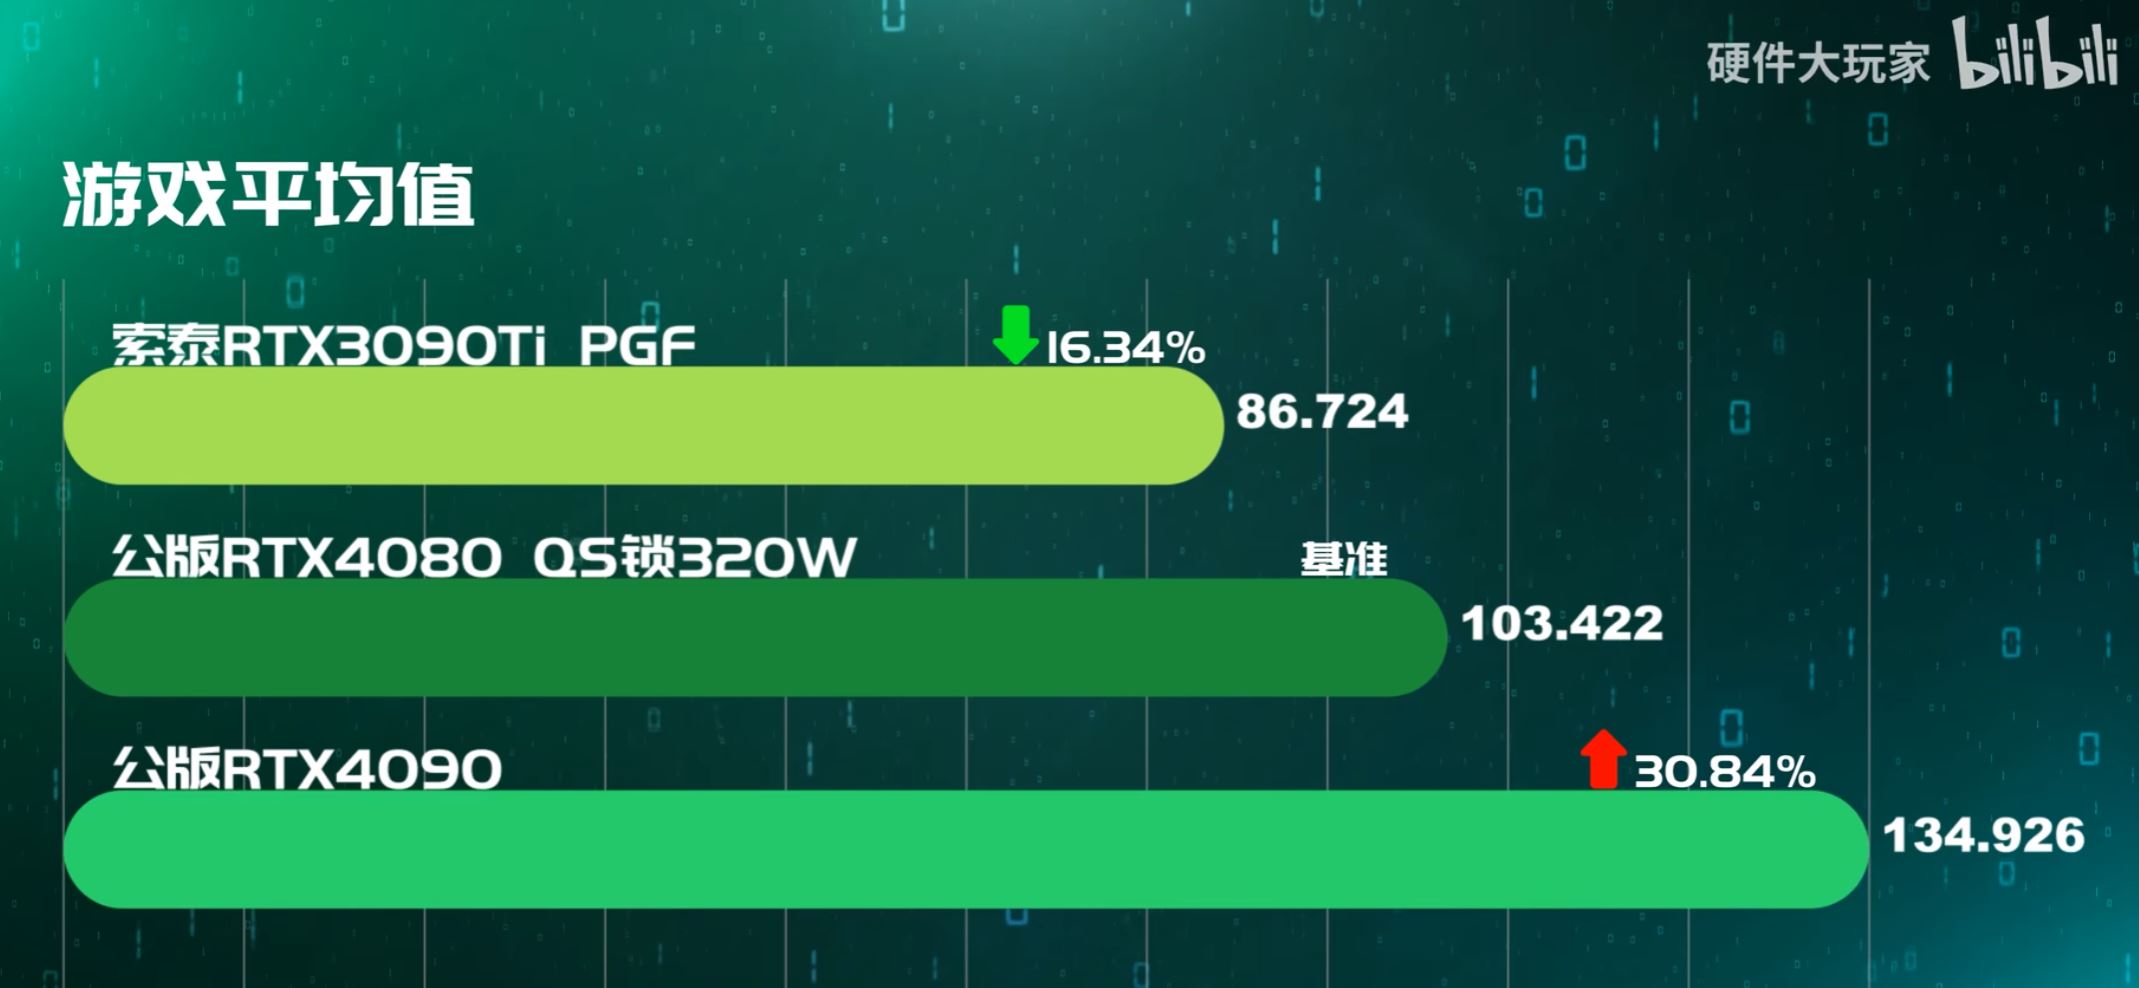 NVIDIA GeForce RTX 4060 is on average 23% faster than RTX 3060 12GB in  3DMark tests 